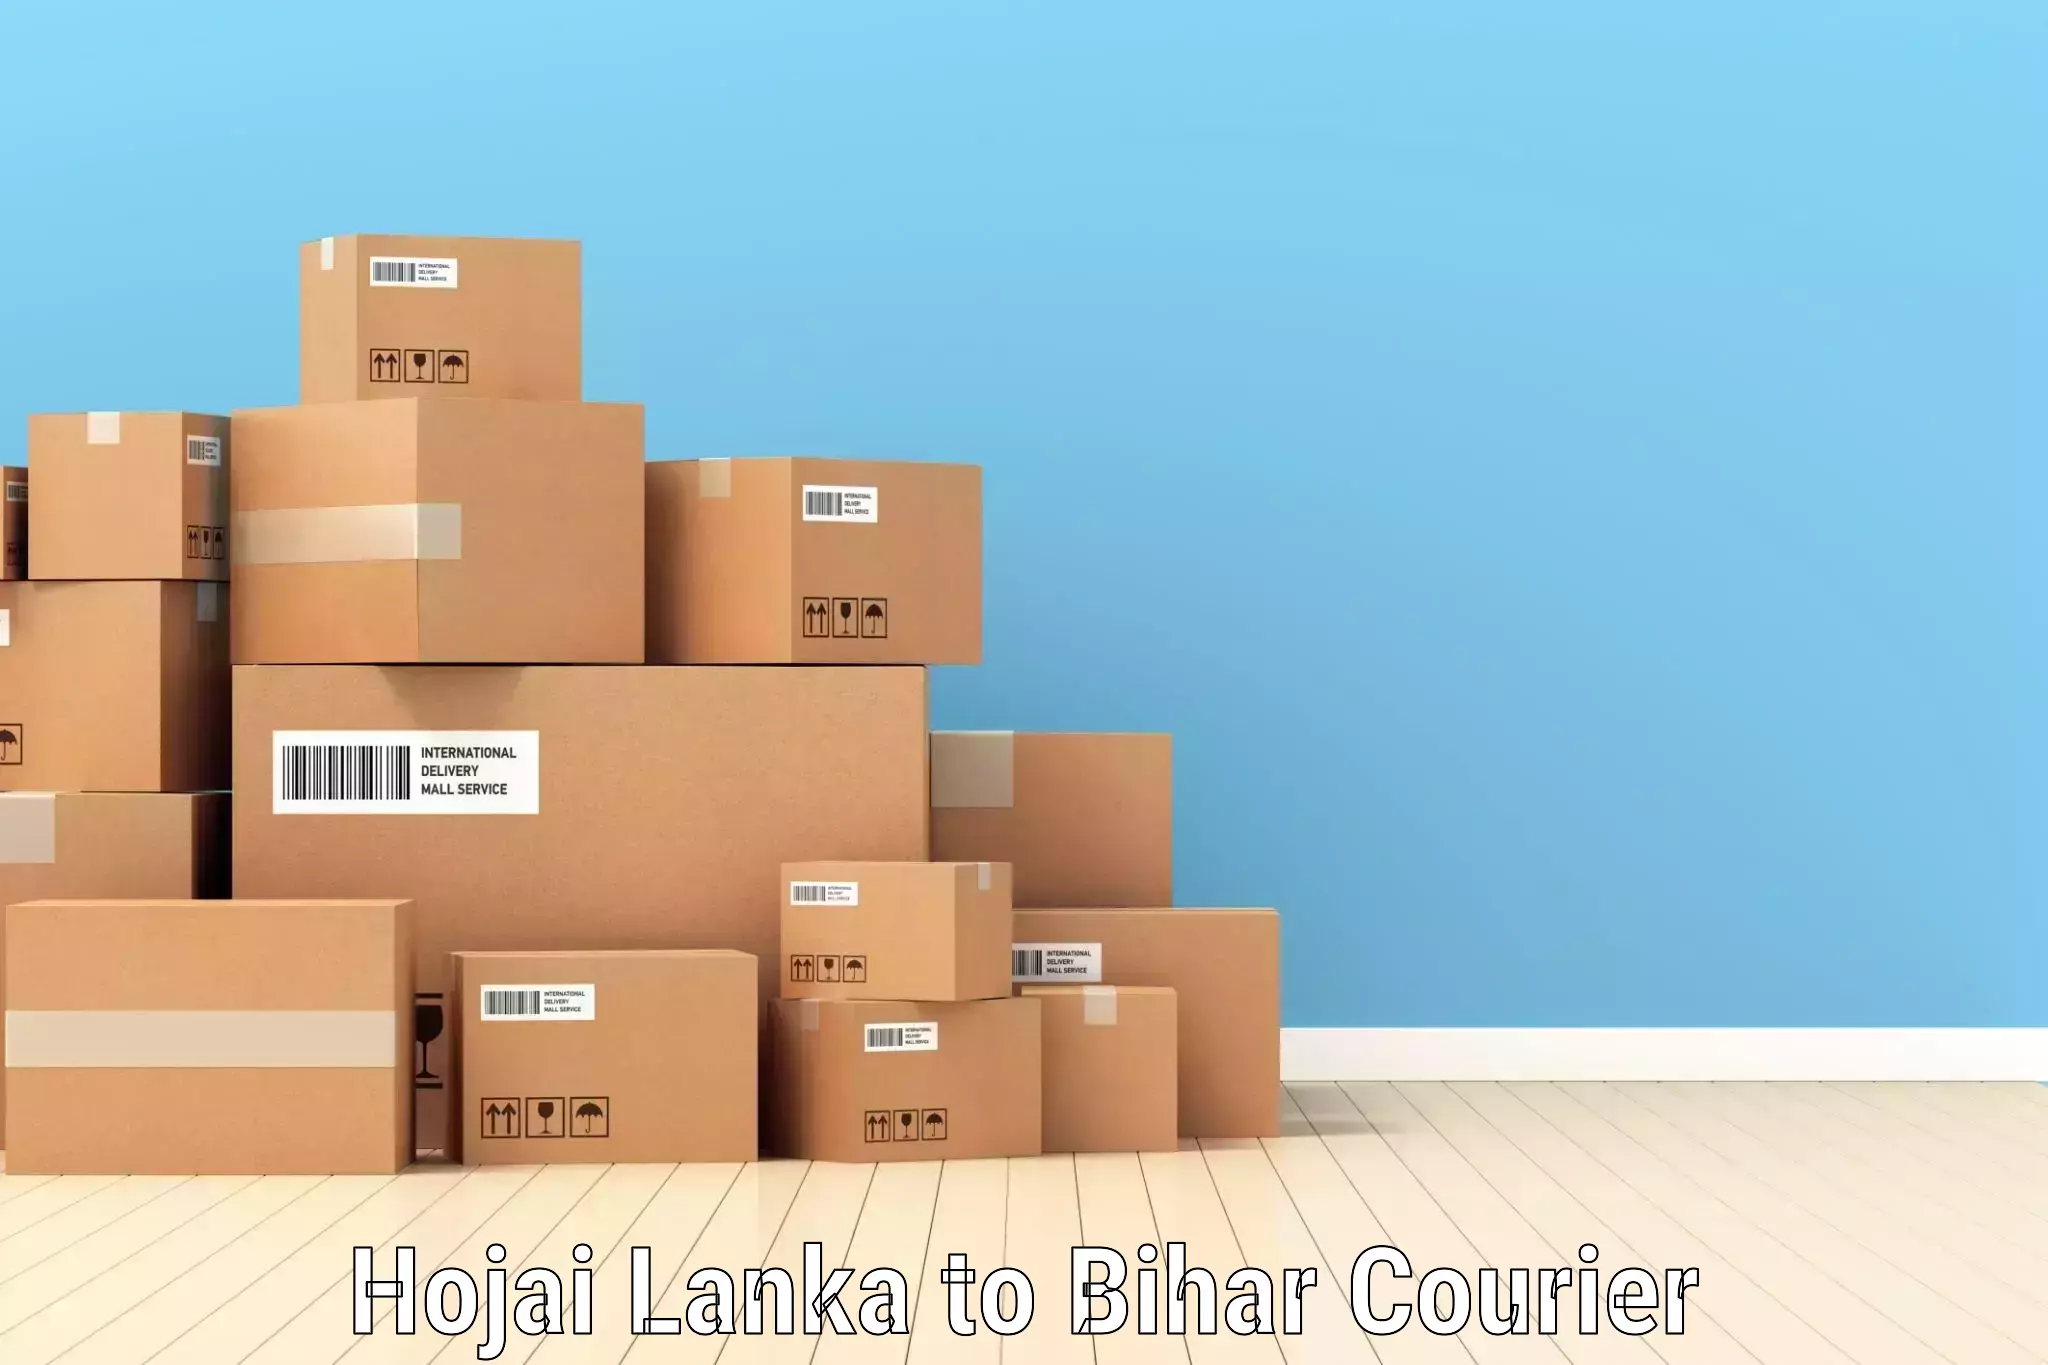 High value parcel delivery Hojai Lanka to Bettiah